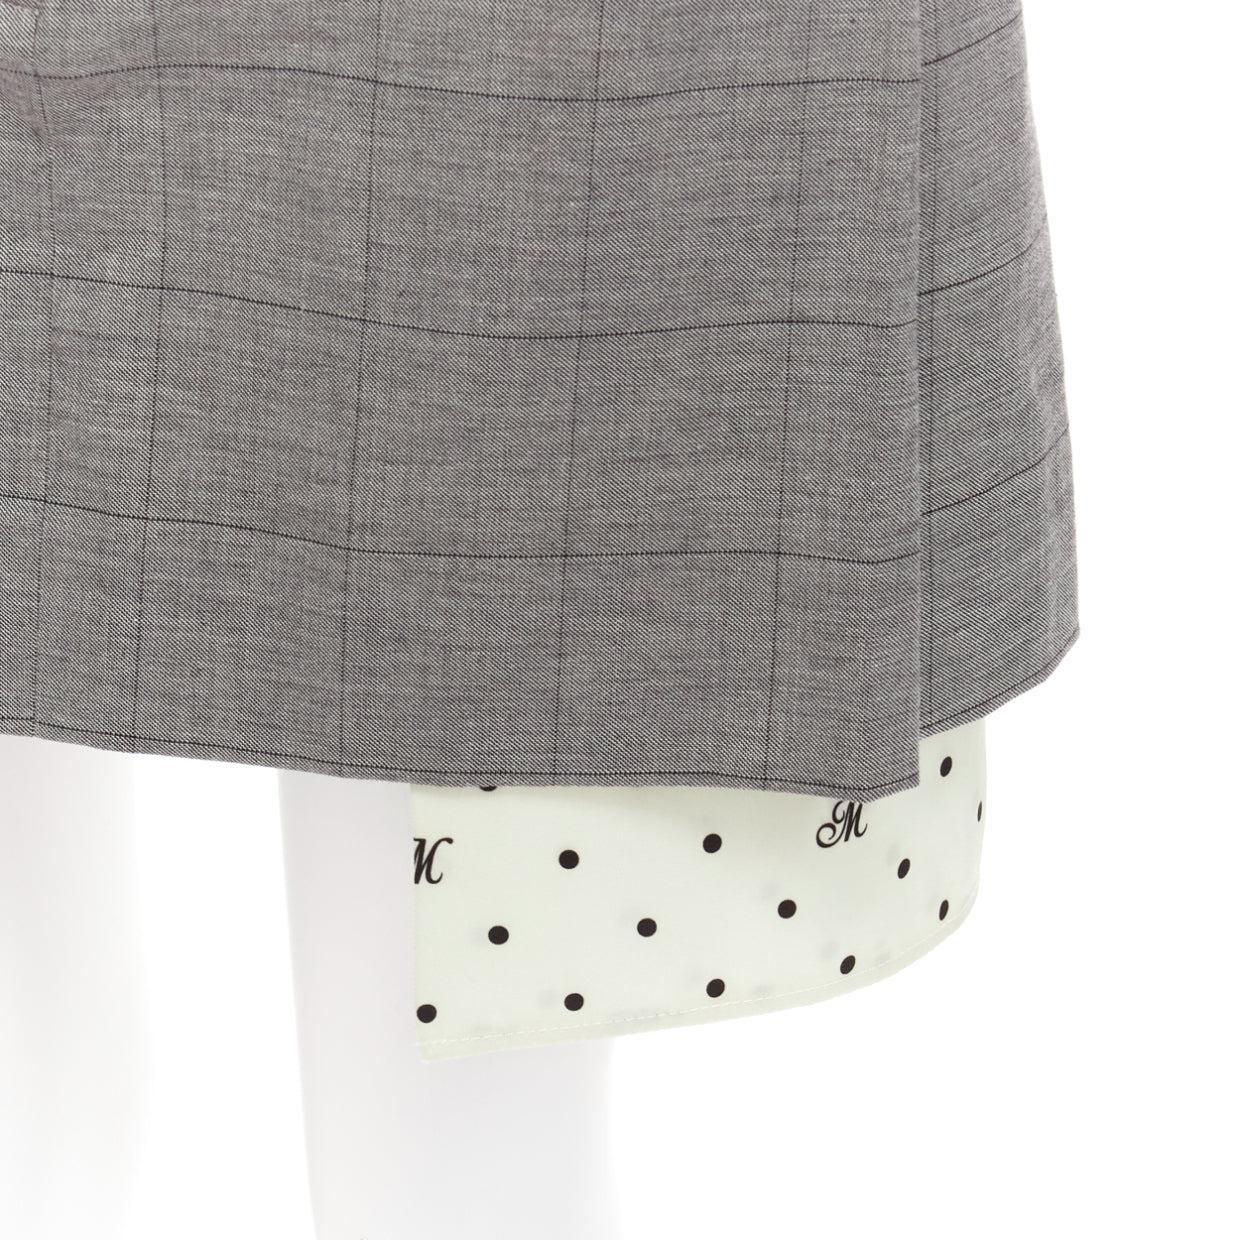 MONSE grey wool cotton blend exposed pocket deconstructed skirt US2 S
Reference: NKLL/A00049
Brand: Monse
Material: Wool, Cotton, Blend
Color: Grey, Cream
Pattern: Plaid
Closure: Zip Fly
Lining: Cream Fabric

CONDITION:
Condition: Excellent, this